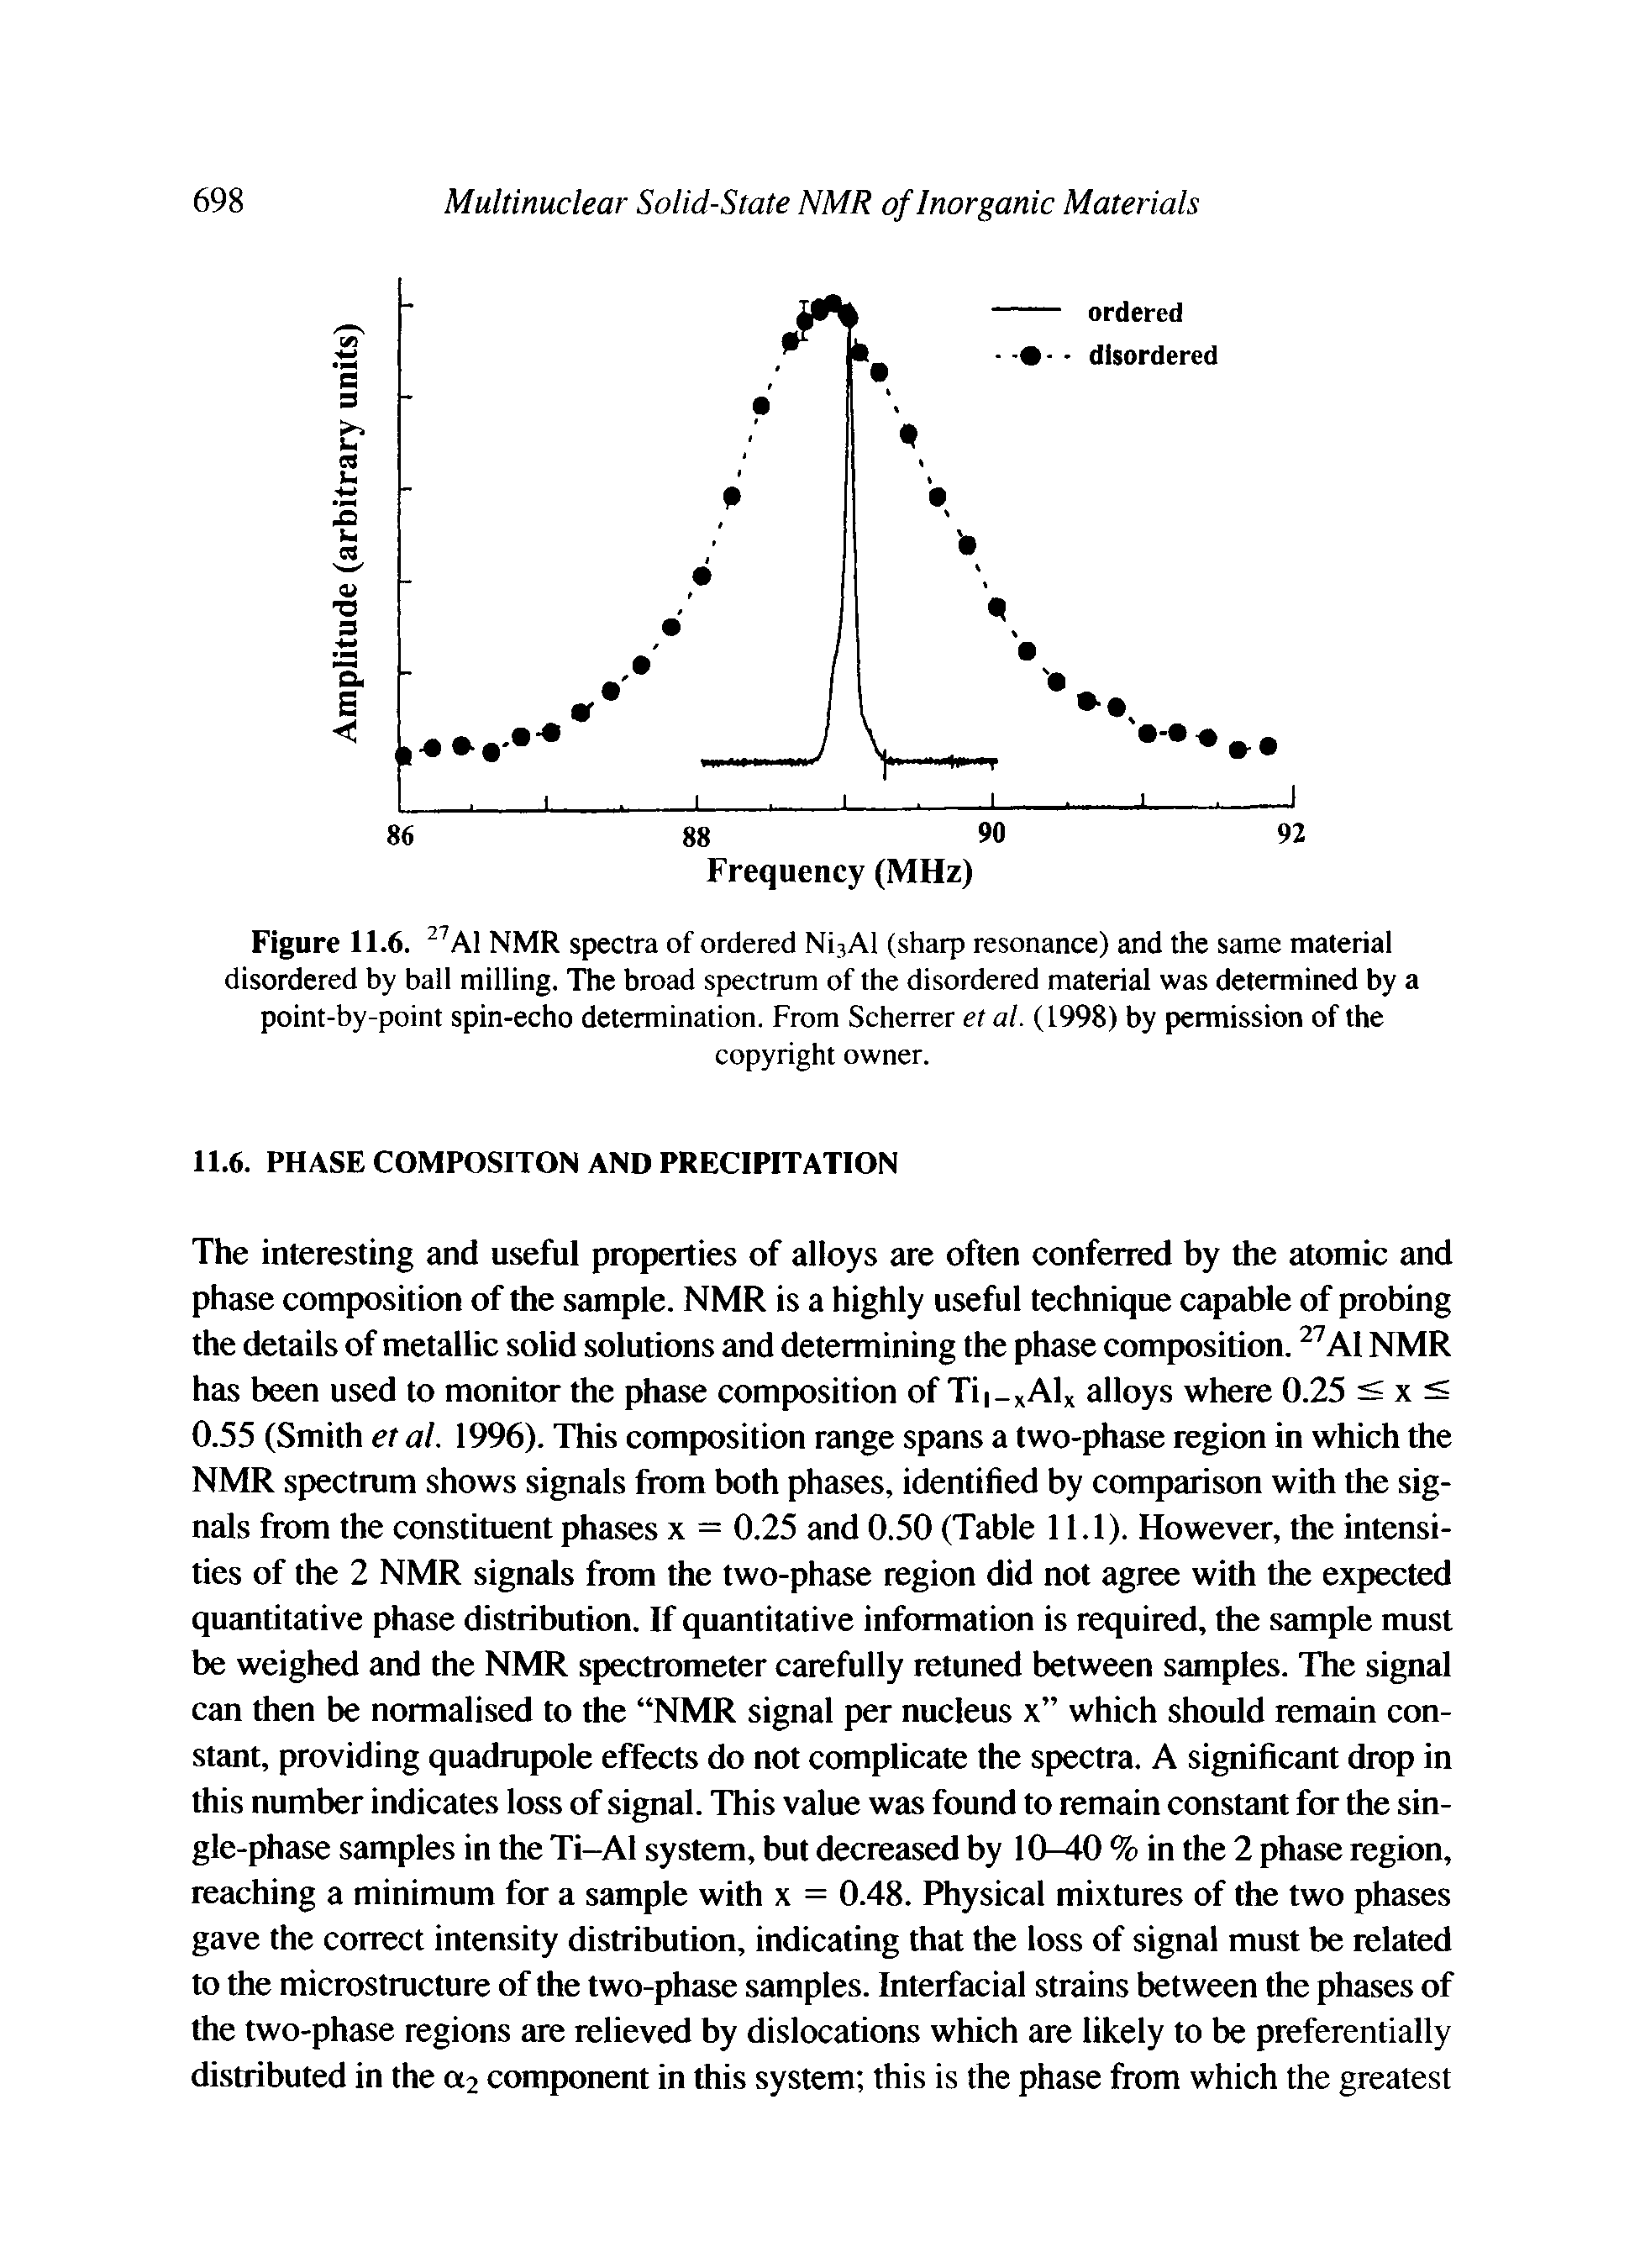 Figure 11.6. NMR spectra of ordered N13AI (sharp resonance) and the same material disordered by ball milling. The broad spectrum of the disordered material was determined by a point-by-point spin-echo determination. From Scherrer et al. (1998) by permission of the...